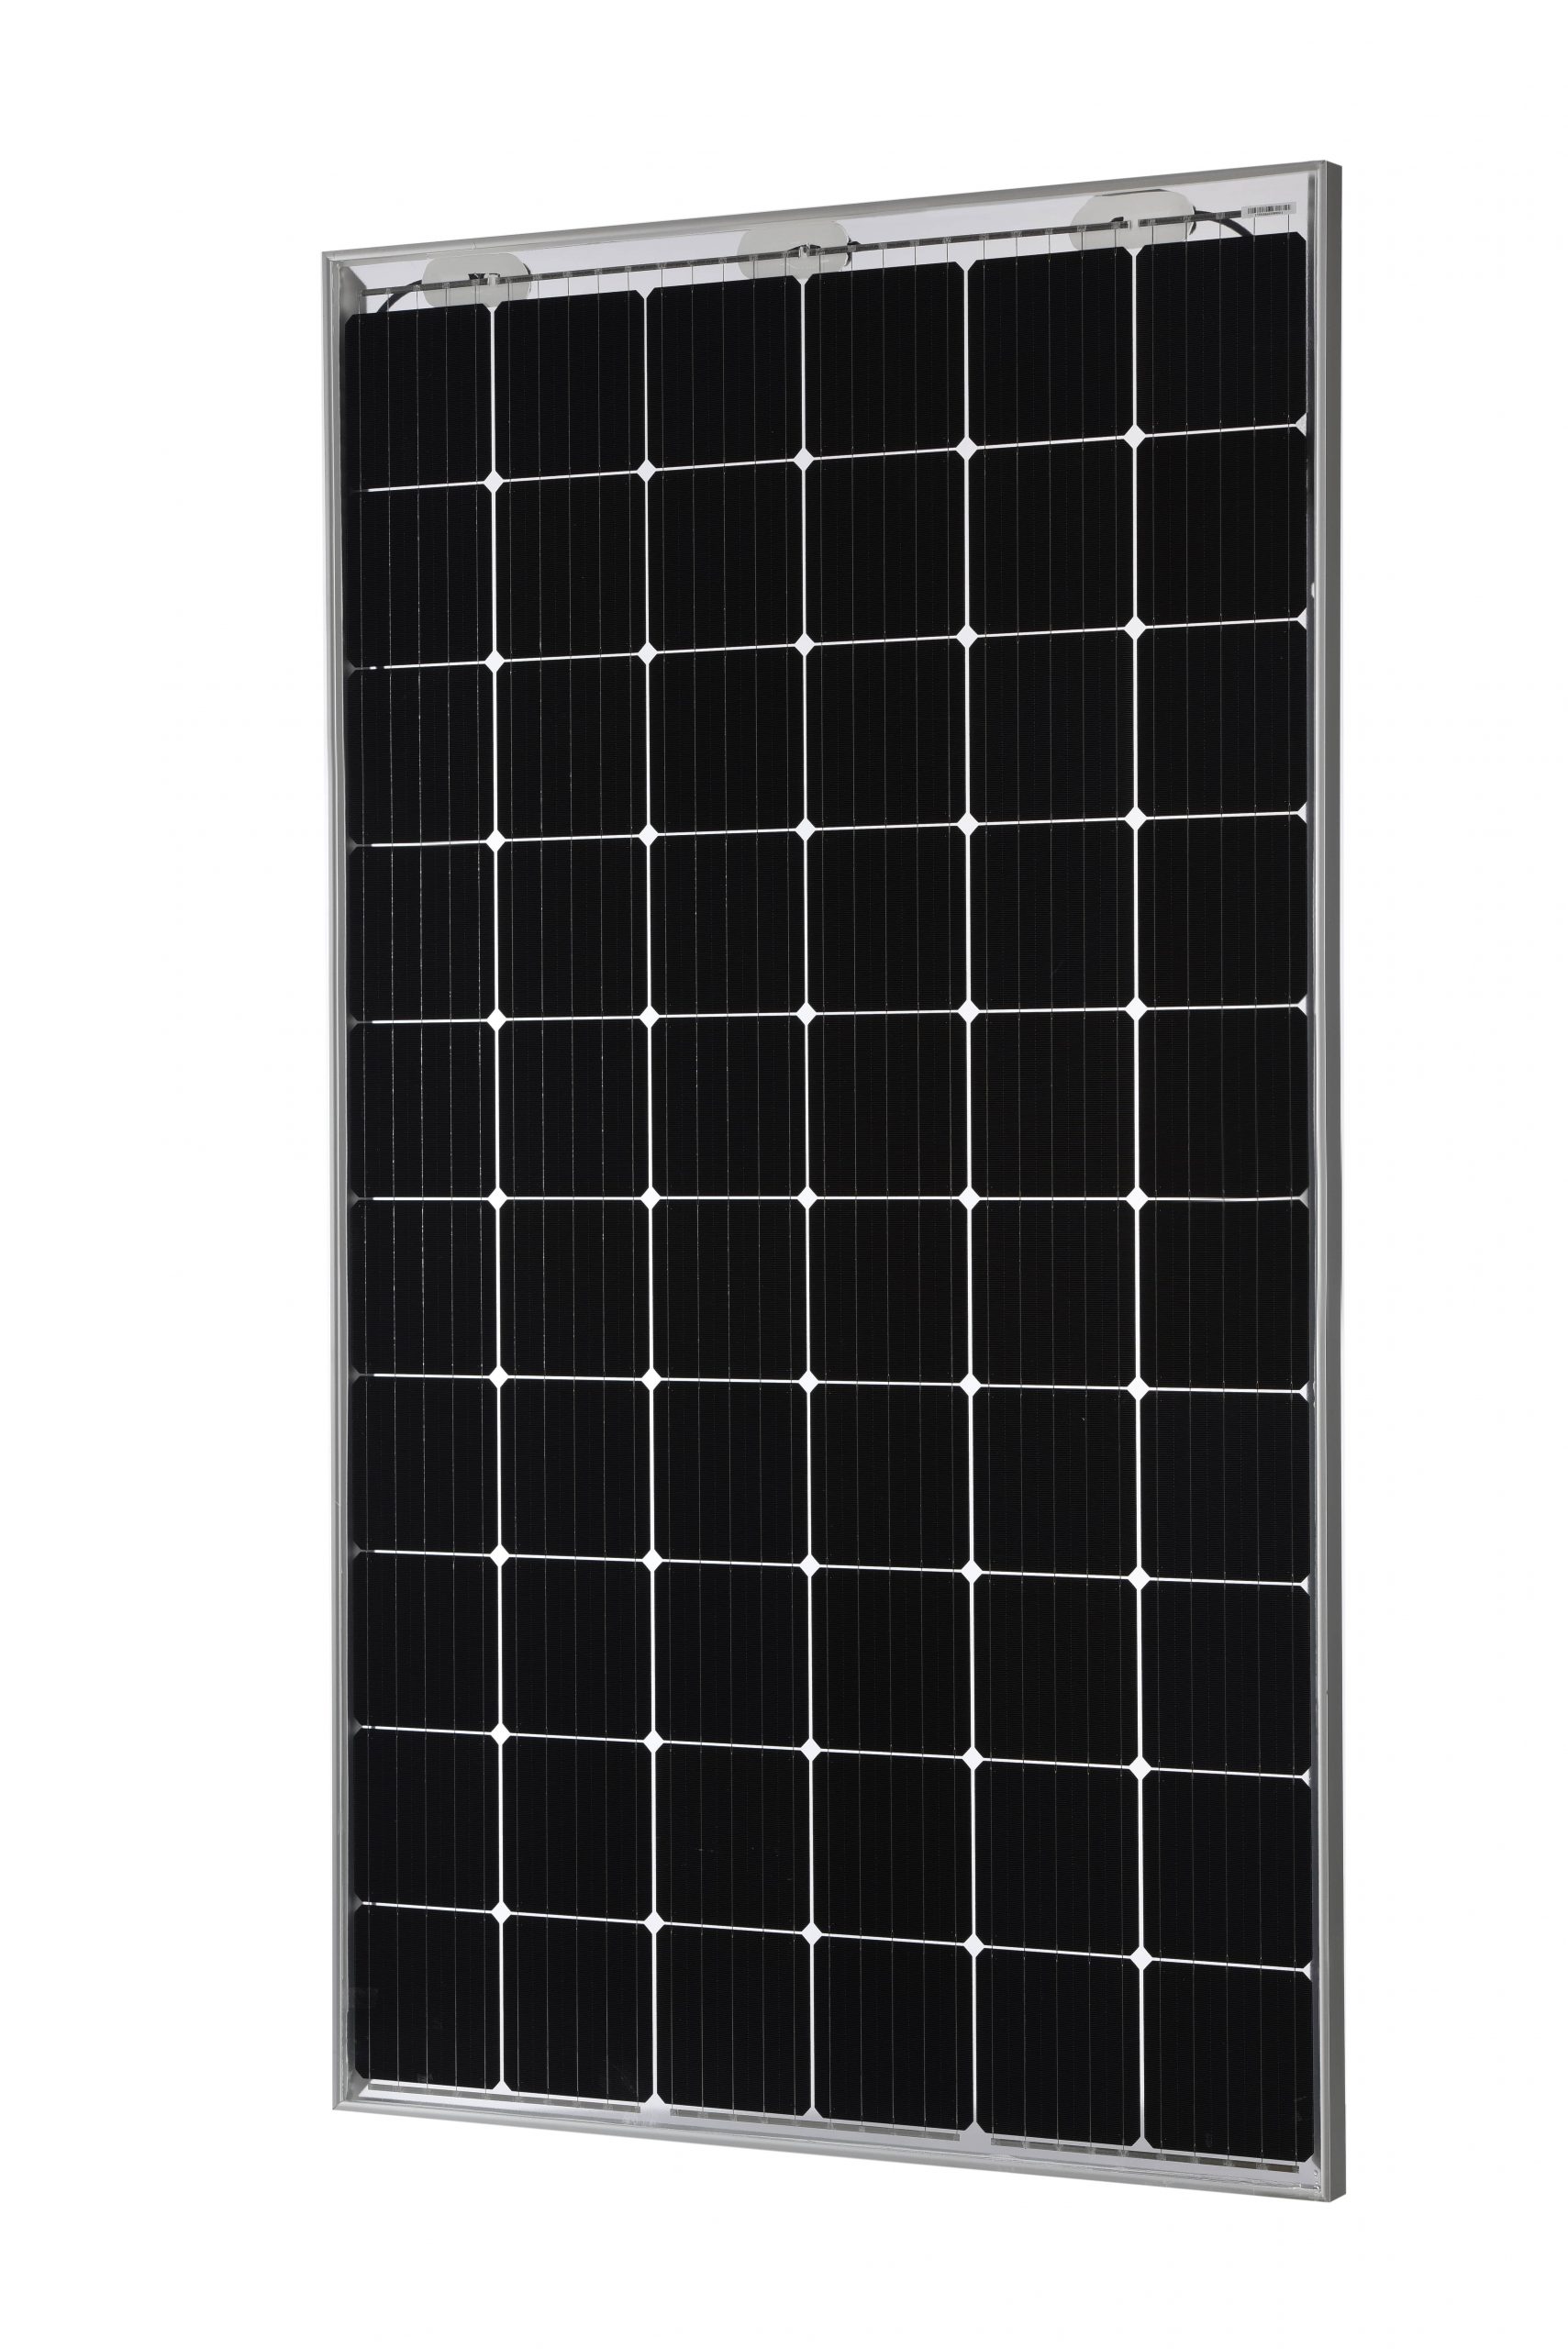 JA Solar Bifacial Double-glass Modules Increases Energy Yield by 23% in Comparison Test Conducted by TÜV Rheinland